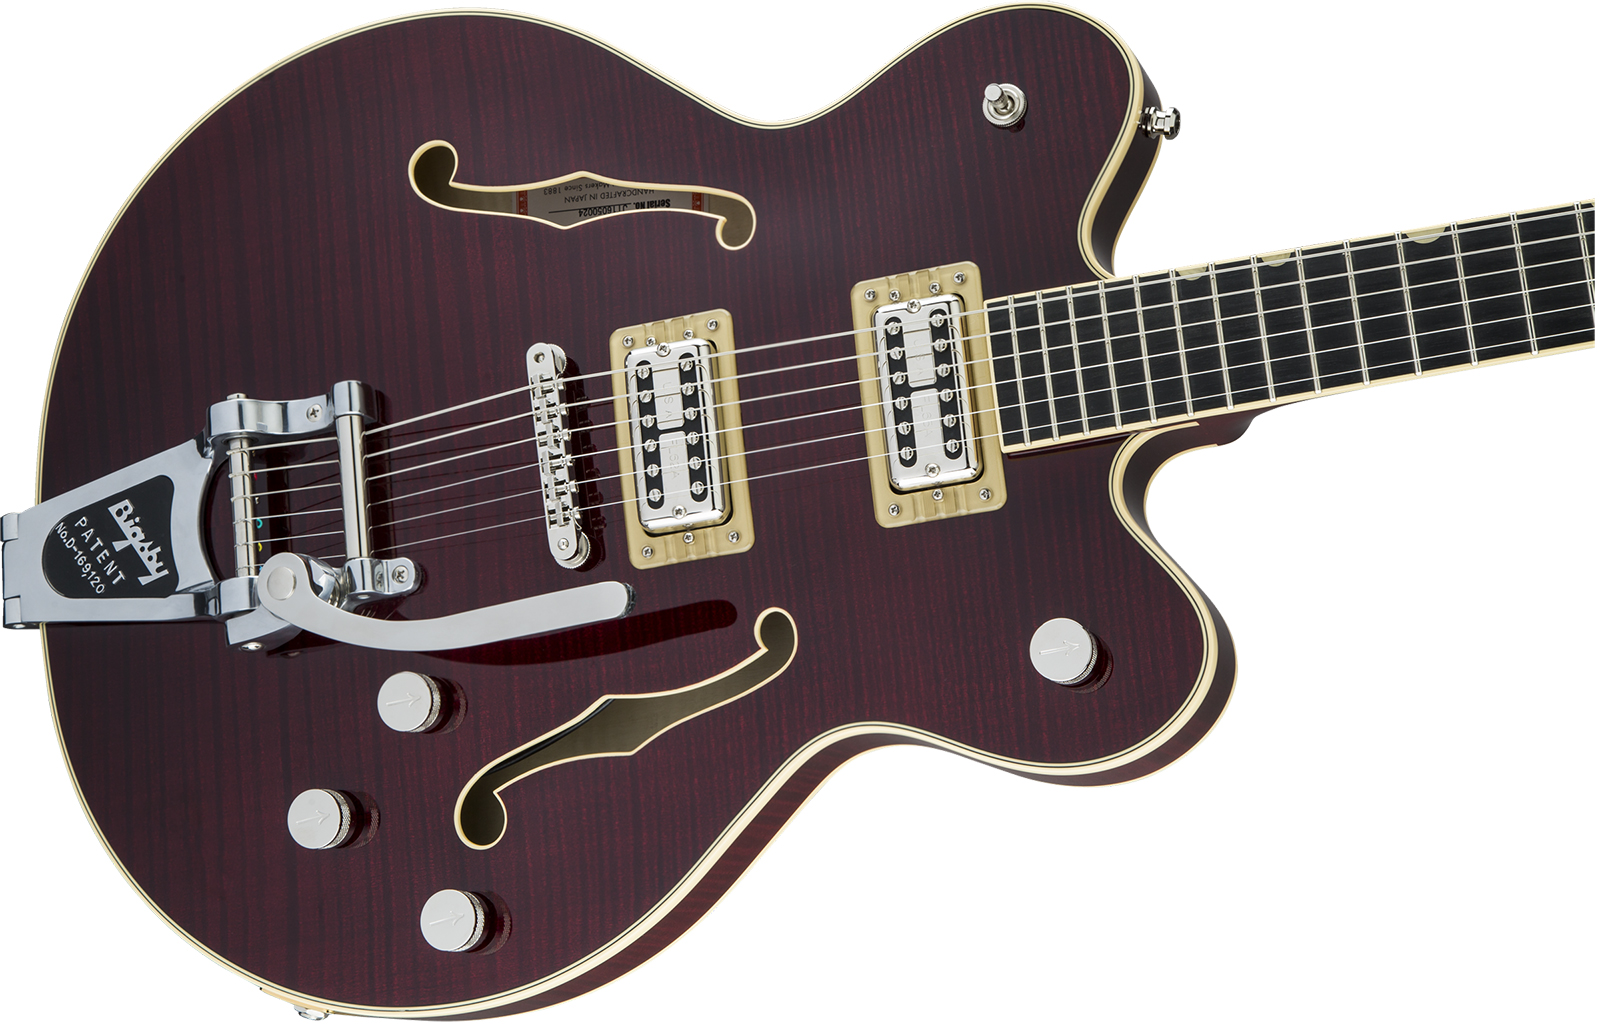 Gretsch G6609tfm Broadkaster Center Bloc Dc Players Edition Pro Jap Bigsby Eb - Dark Cherry Stain - Semi-hollow electric guitar - Variation 2